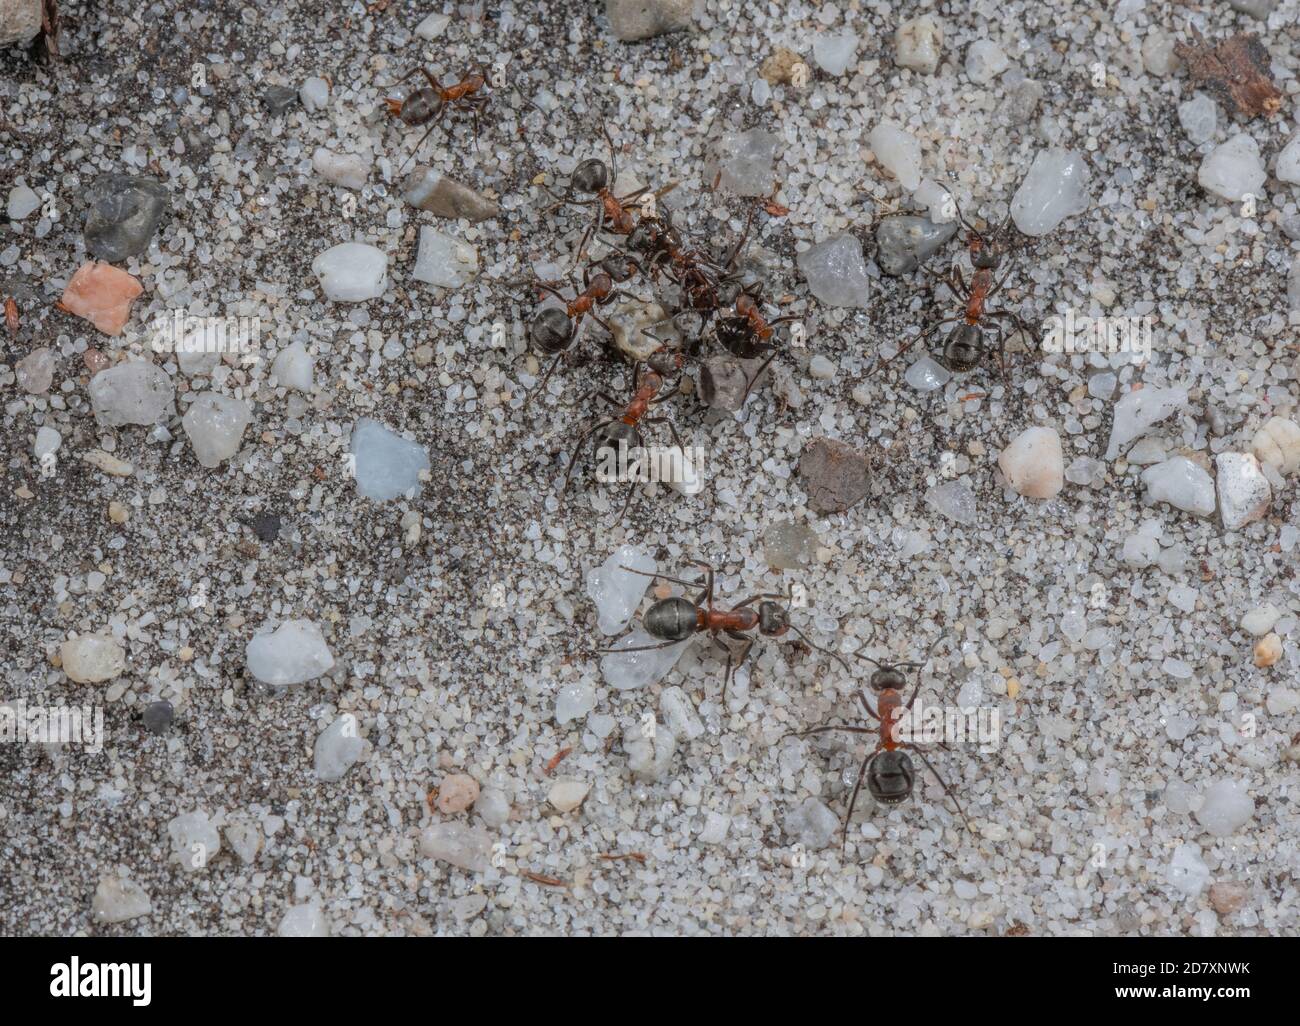 Southern Wood Ants, Formica rufa, on their 'highway' to their heathland-edge nest. Stock Photo